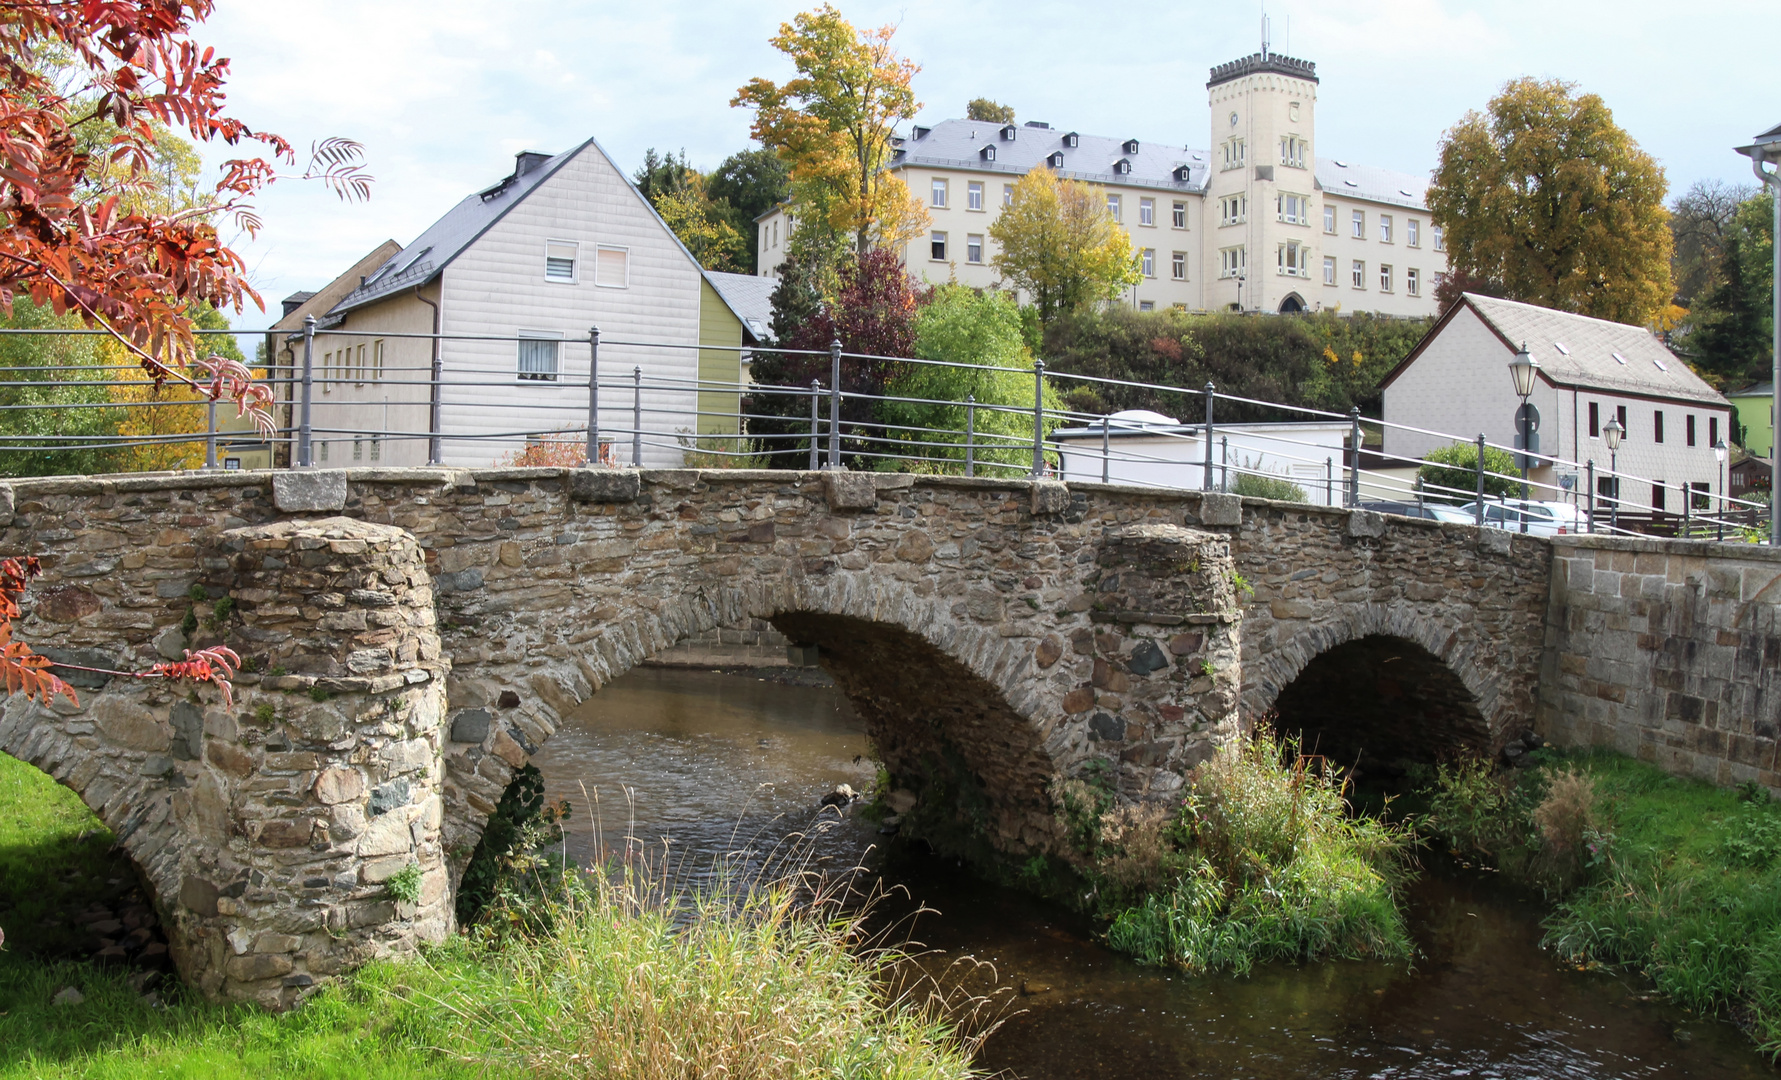 THE OLD BRIDGE and the CASTLE OF OBERKOTZAU